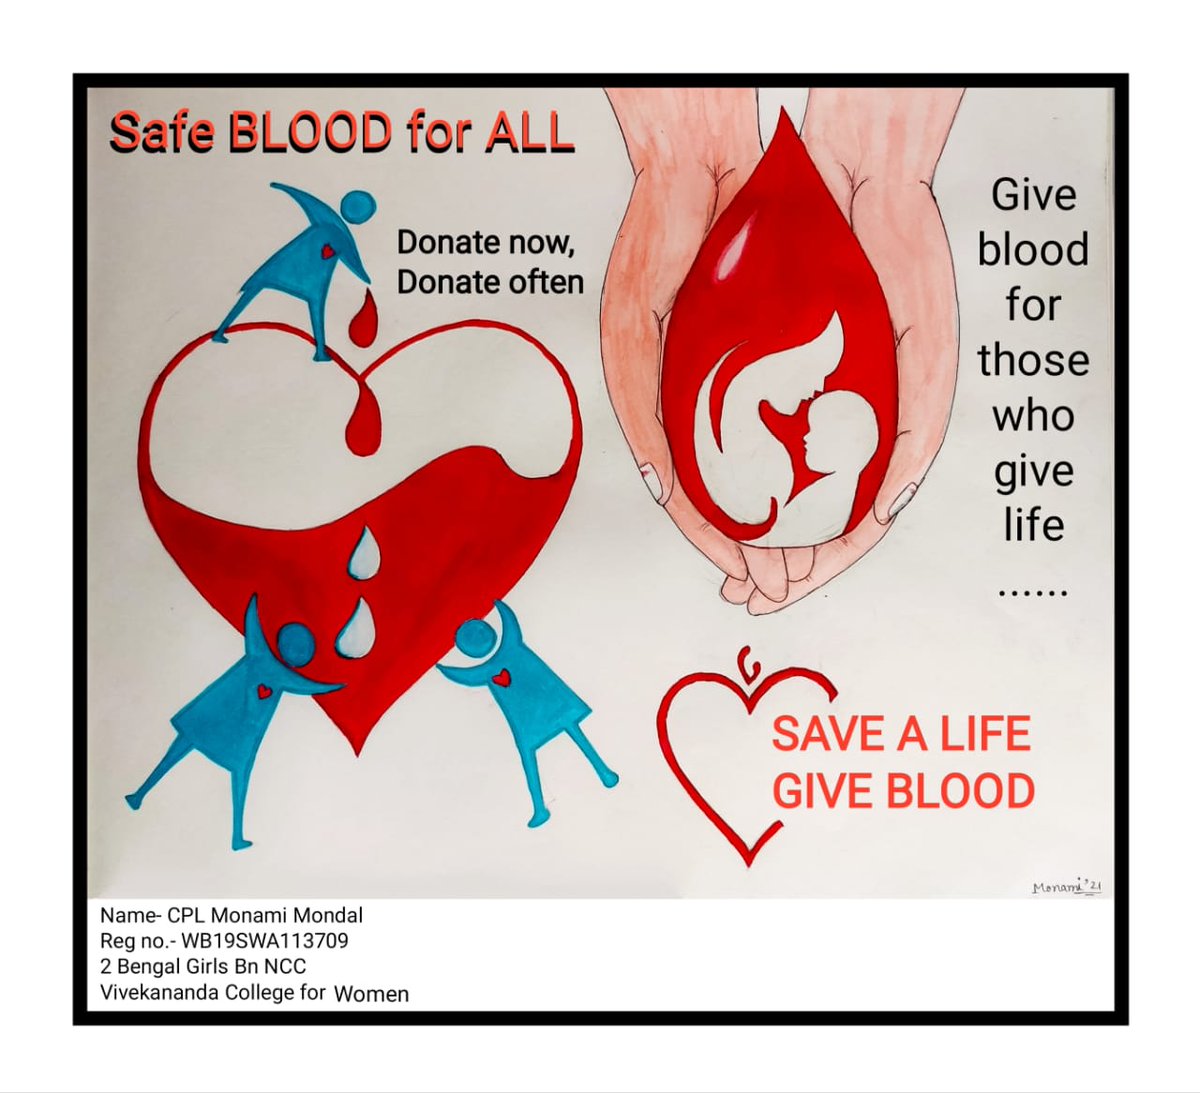 Donate Blood, Save Lives!